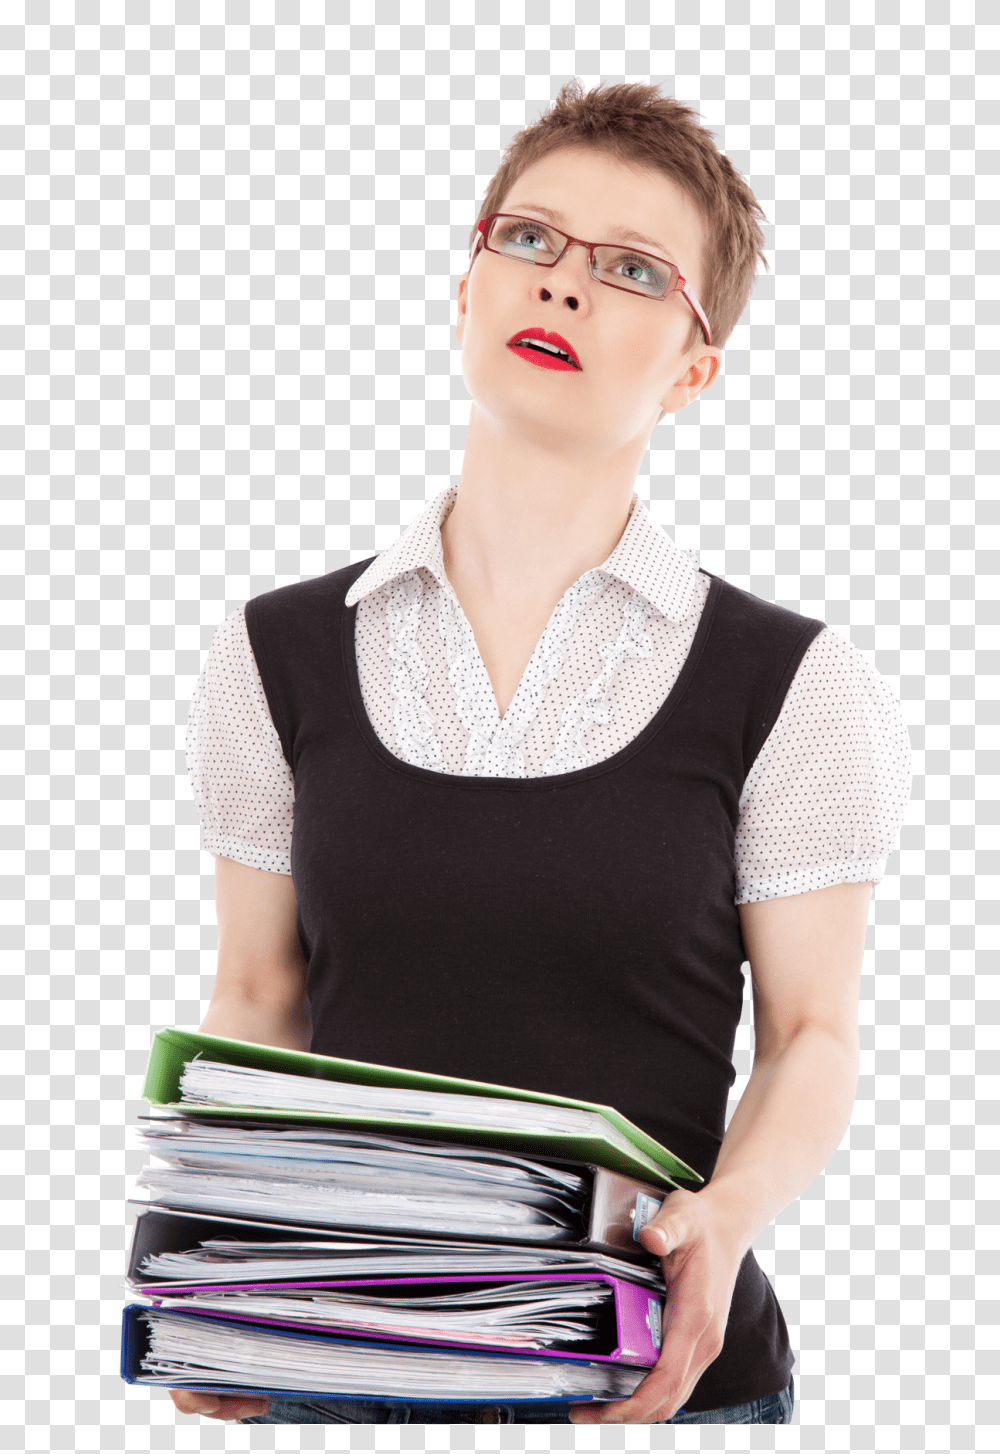 Female Office Worker Carrying A Stack Of Files Image, Person, Blouse, Vest Transparent Png